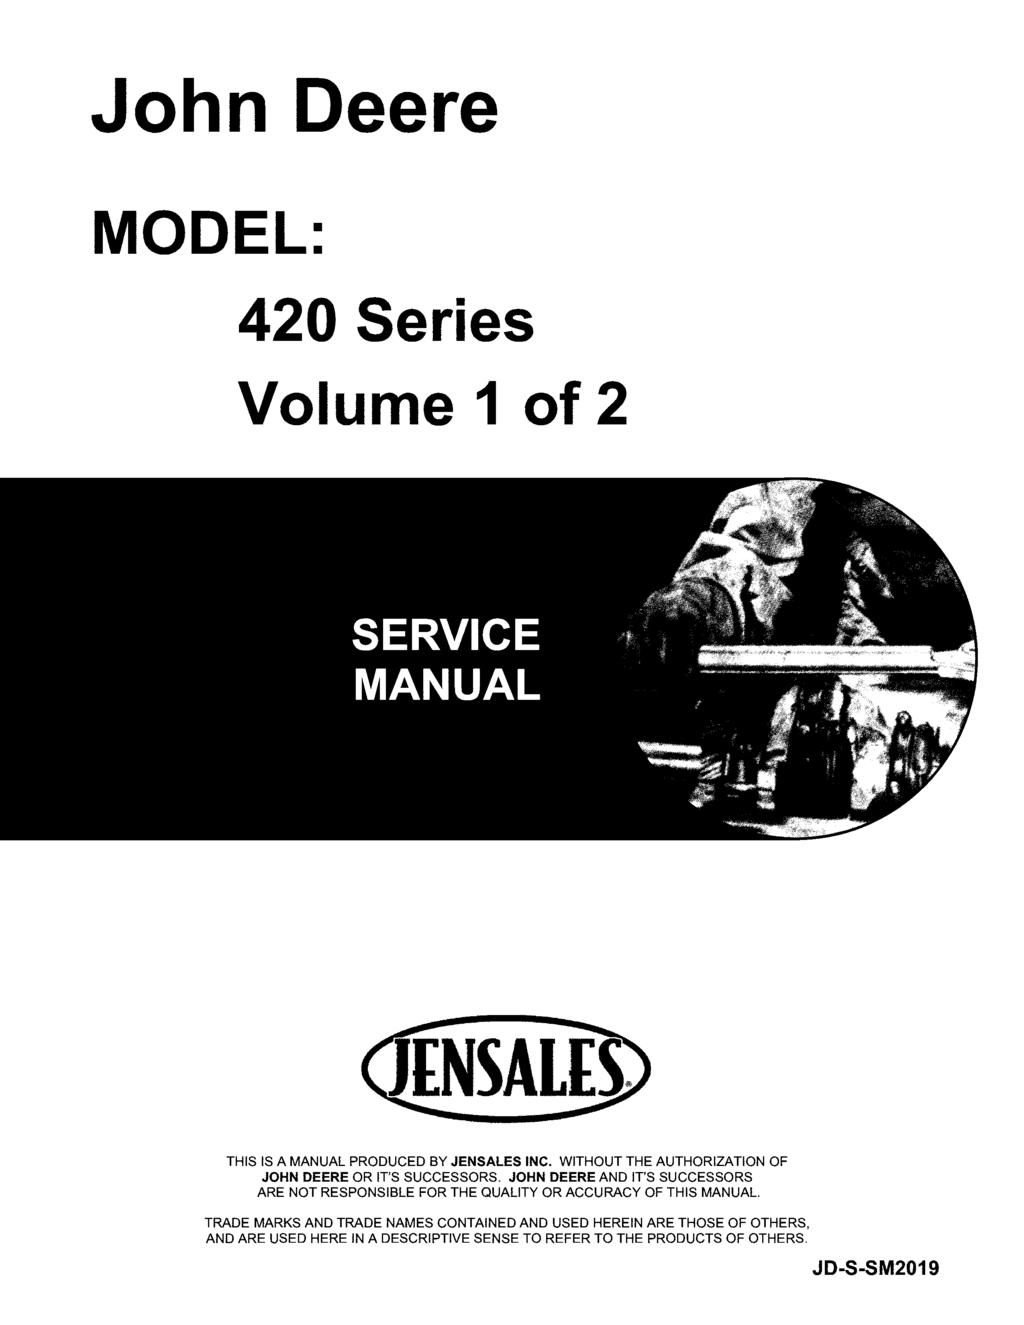 John Deere MODEL: 420 Series Volume 1 of 2 THIS IS A MANUAL PRODUCED BY JENSALES INC. WITHOUT THE AUTHORIZATION OF JOHN DEERE OR IT'S SUCCESSORS.